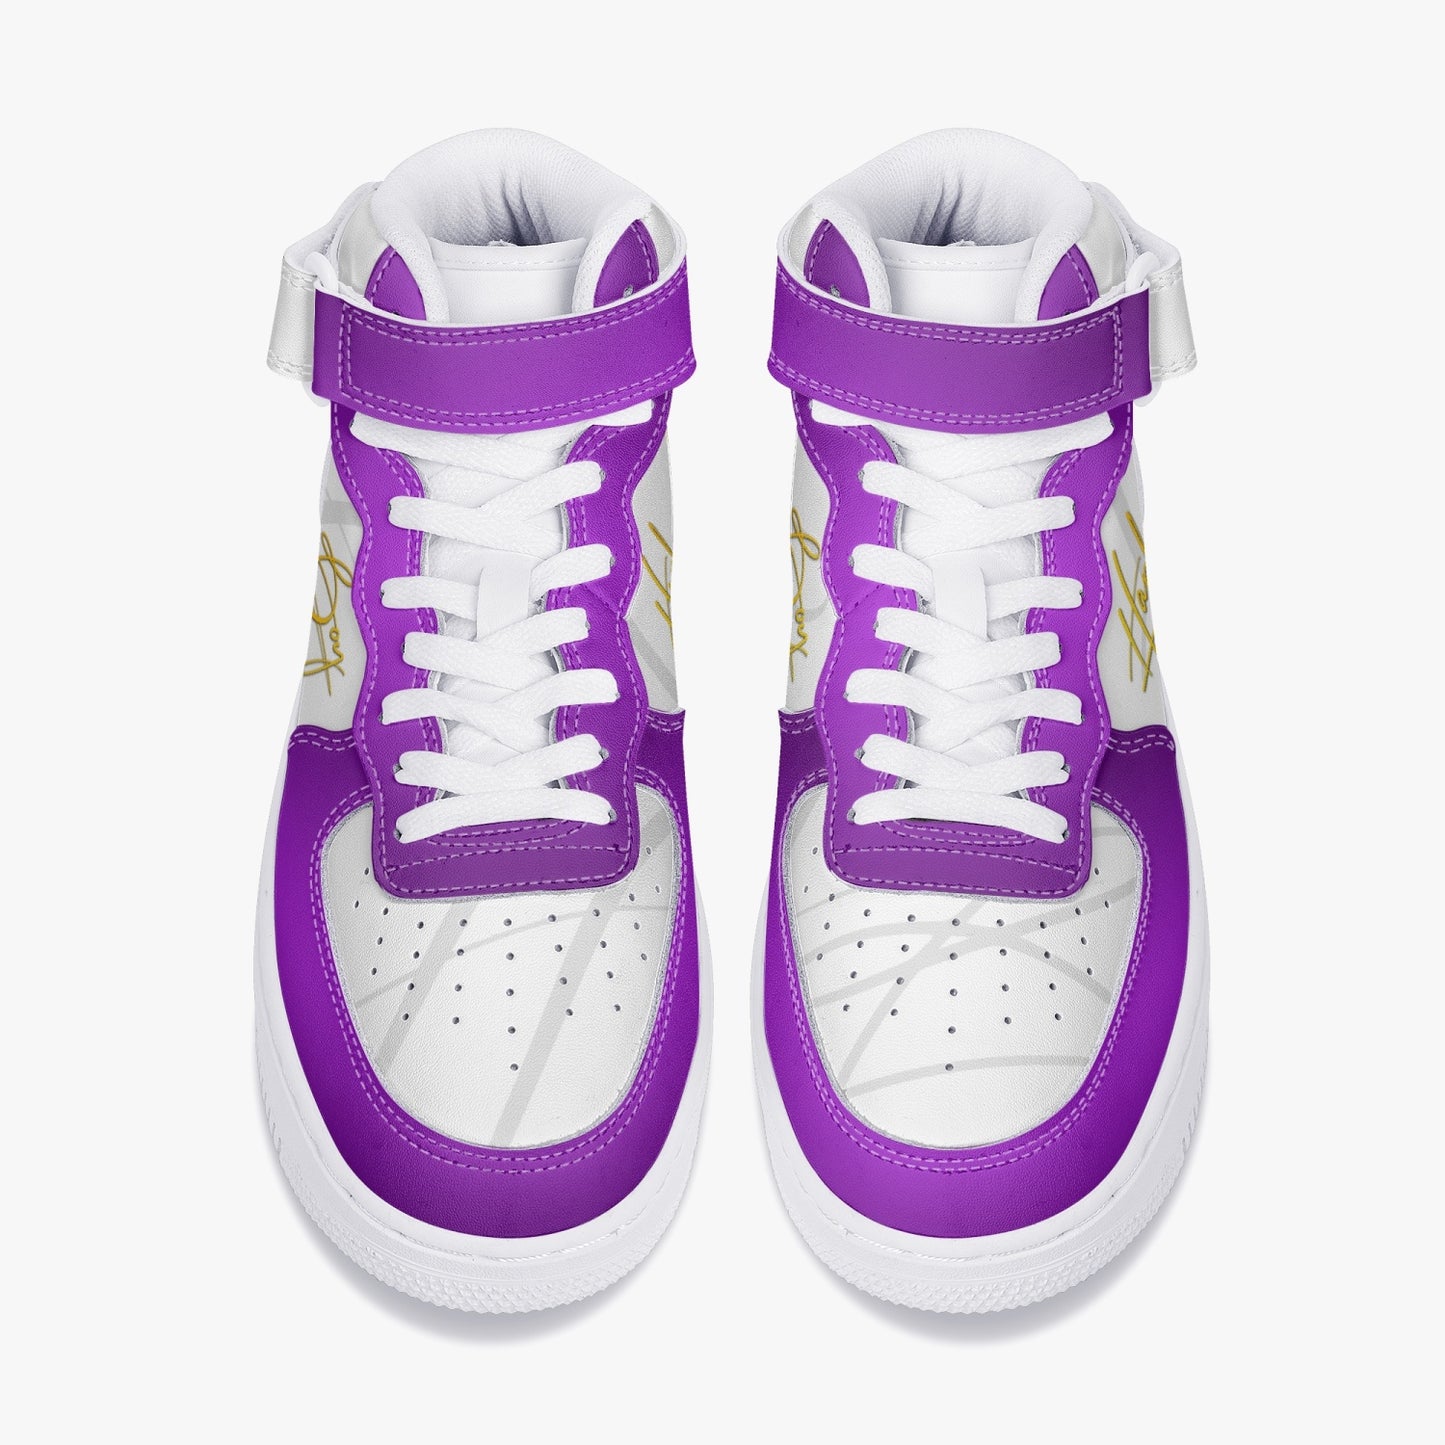 Harlem Boy "STRAPPED" MEN's High-Top Leather Kicks - Purple and Gold